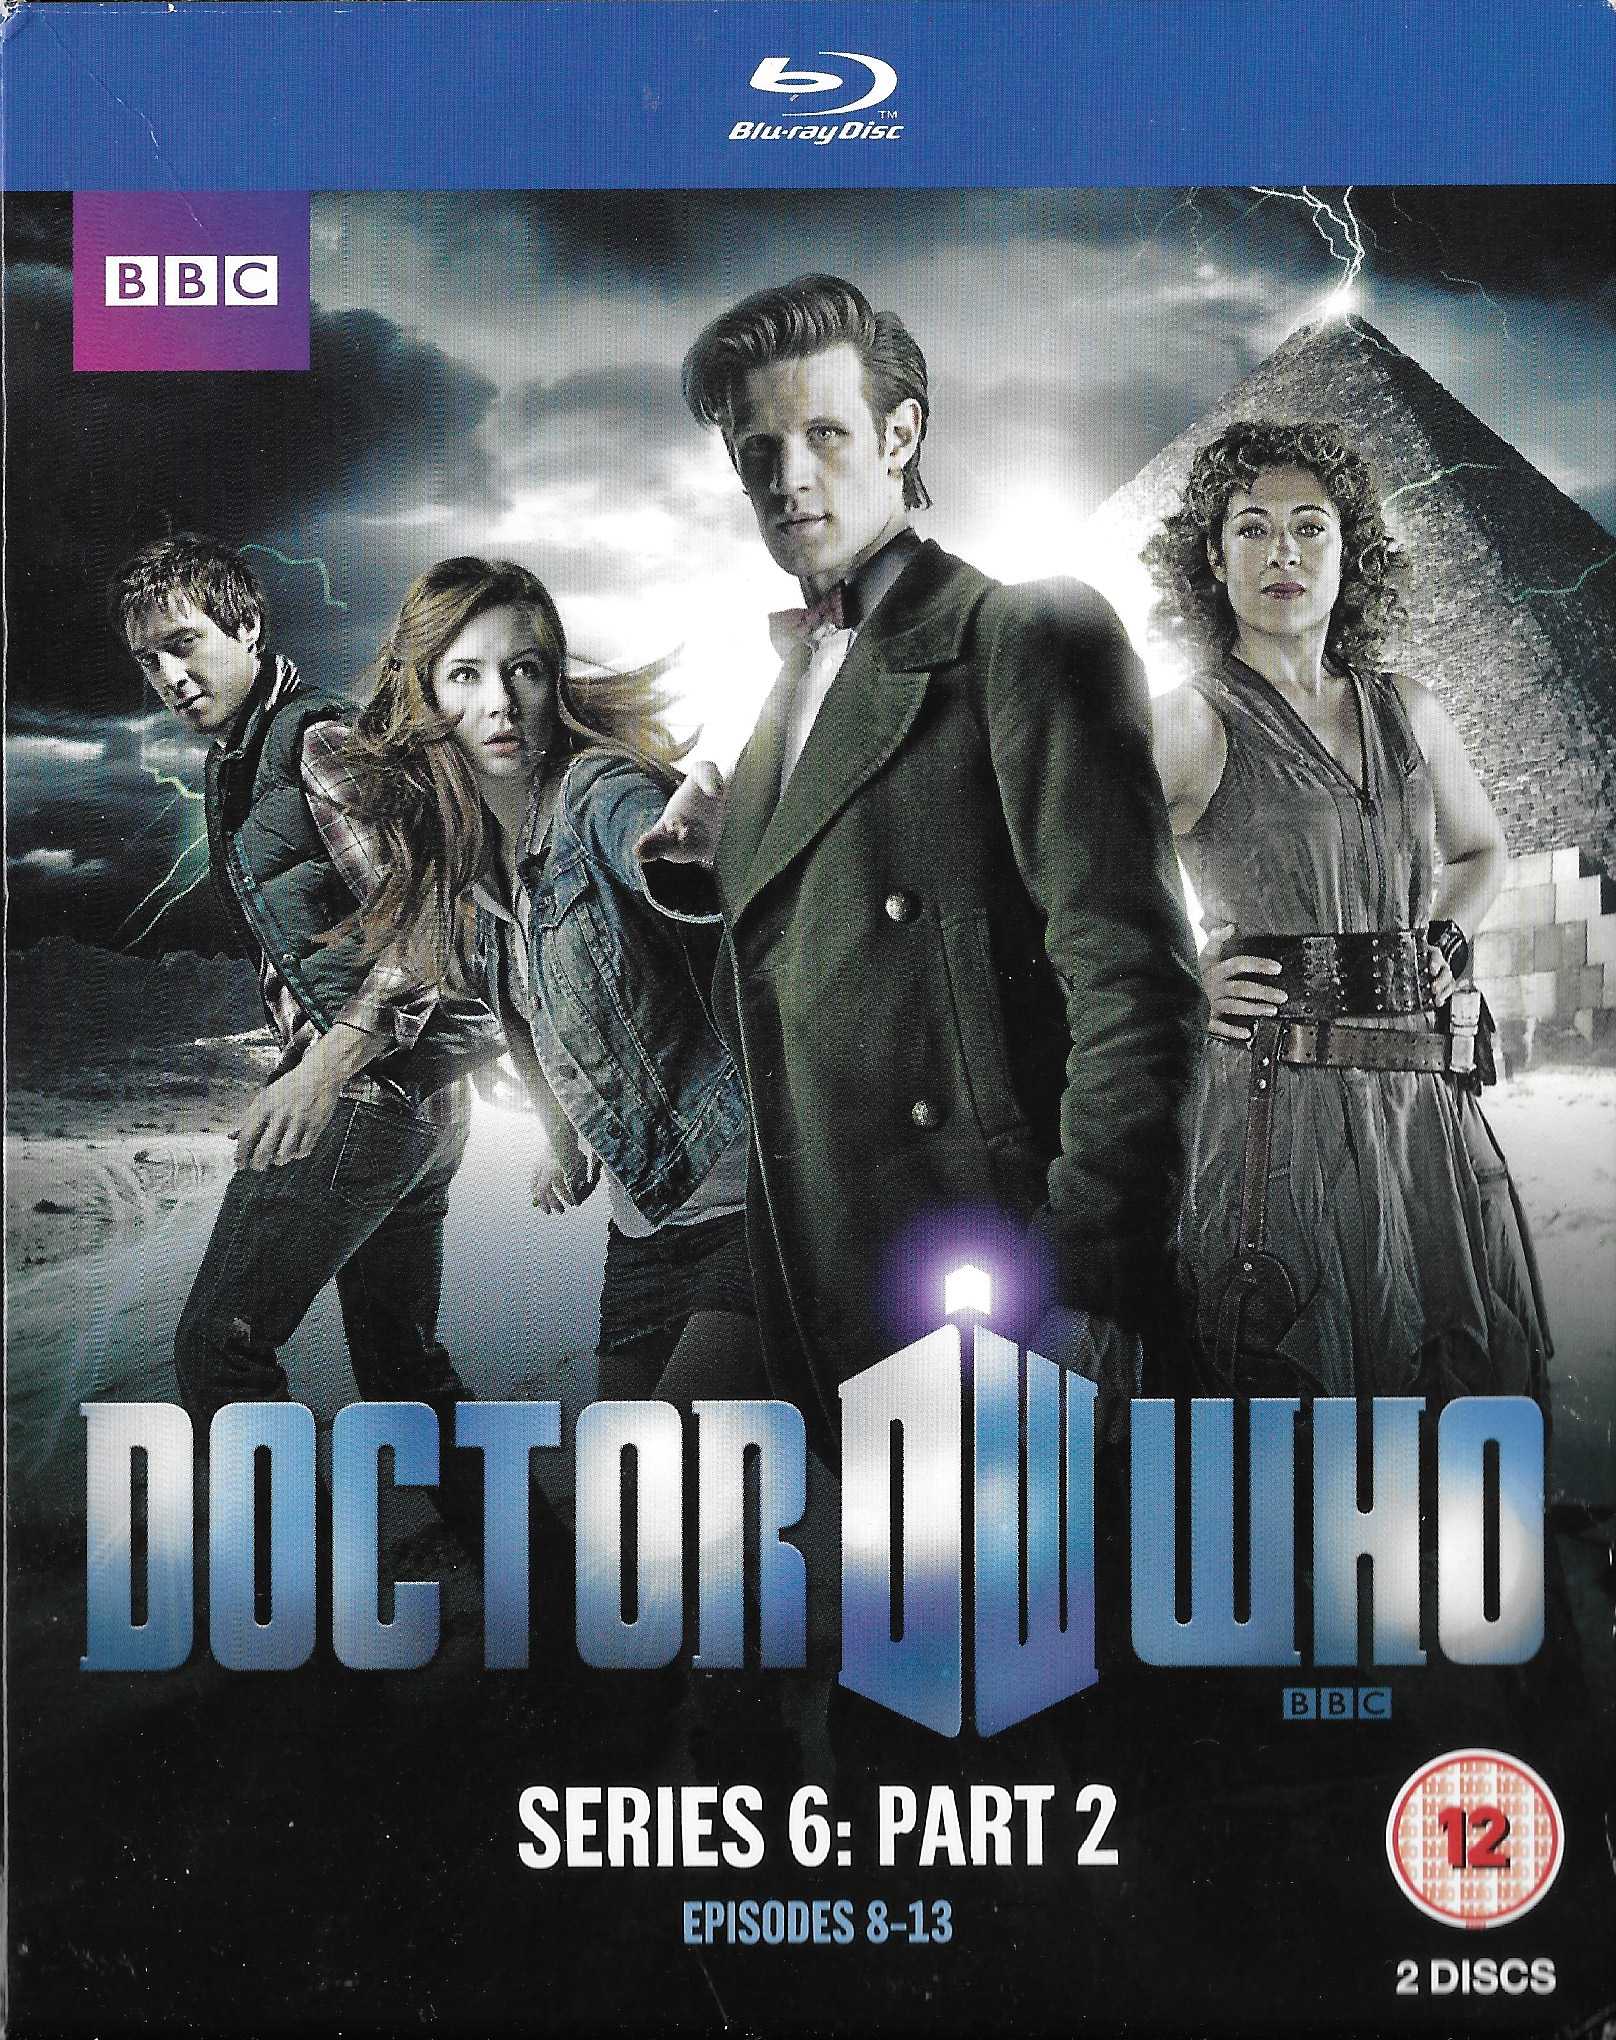 Picture of Doctor Who - Series 6, part 2 by artist Steven Moffat / Mark Gatiss / Tom Macrae / Toby Whithouse / Gareth Roberts from the BBC blu-rays - Records and Tapes library